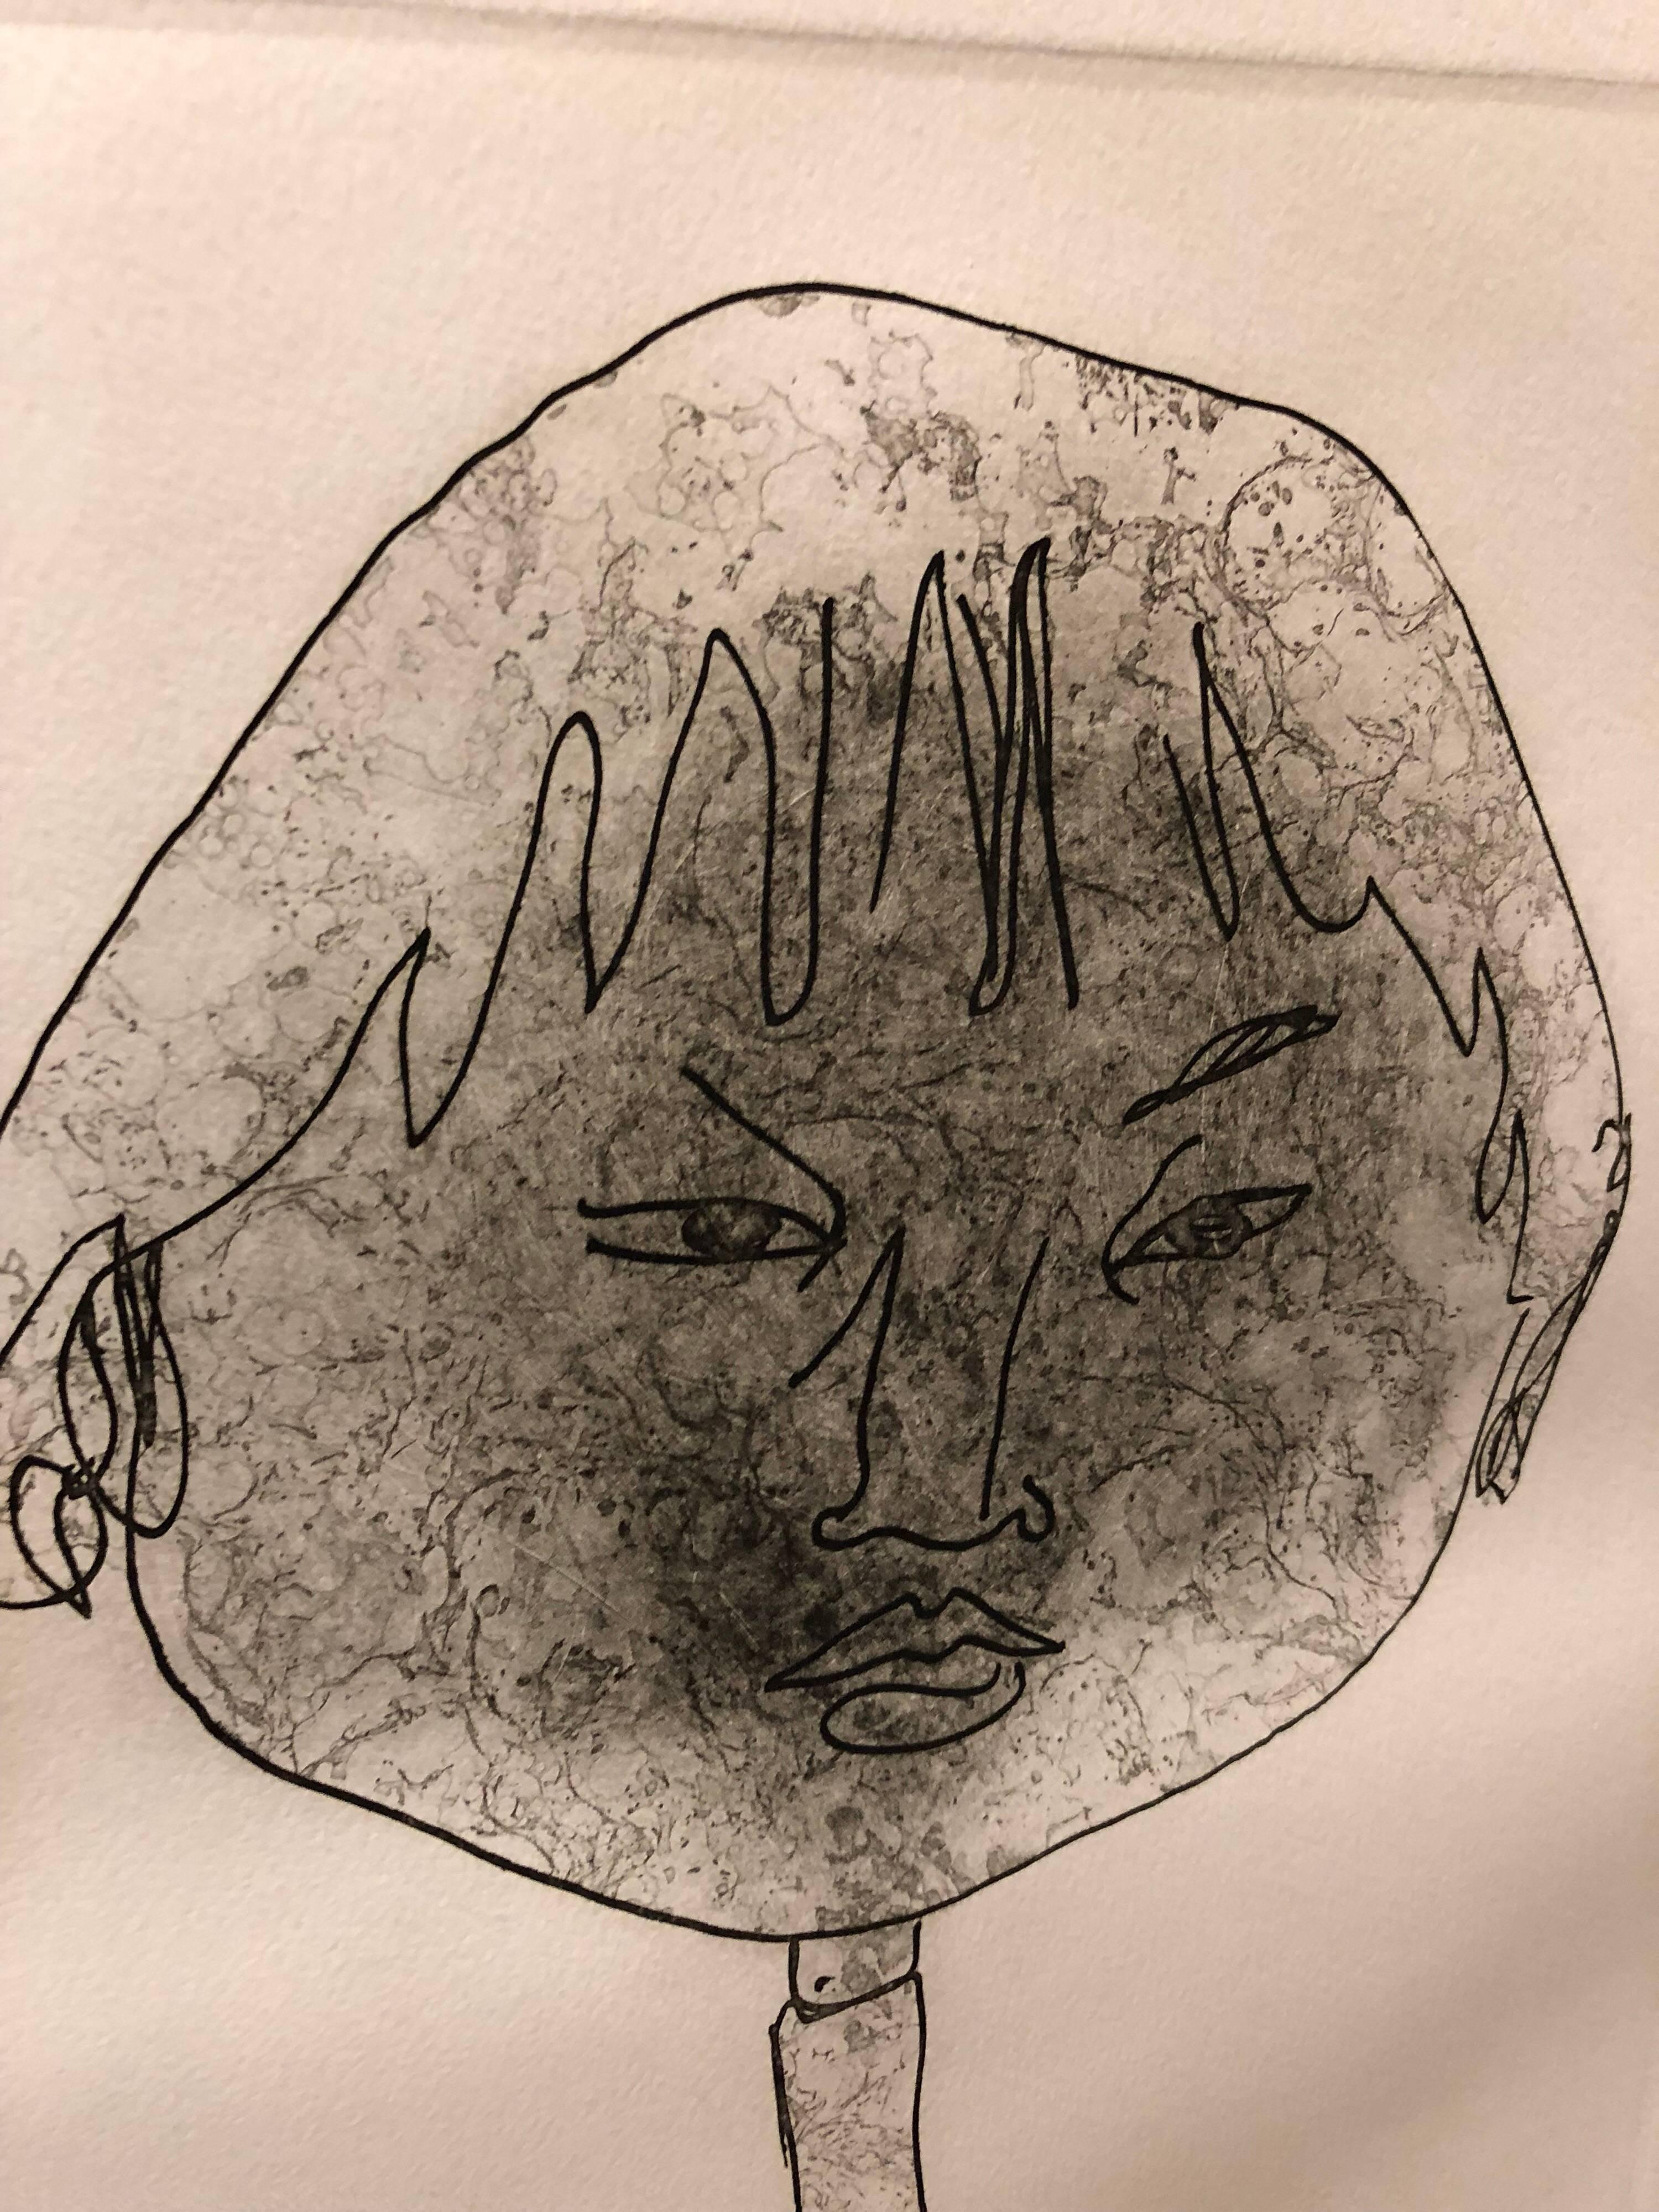 Genre: Other
Subject: Portrait
Medium: Aquatint Eching Print
Surface: Paper
Country: United States


The artist Bernard Stern illustrates the portrait of a boy in a non-realistic, caricature manner. the artist uses simple contour lines to create the